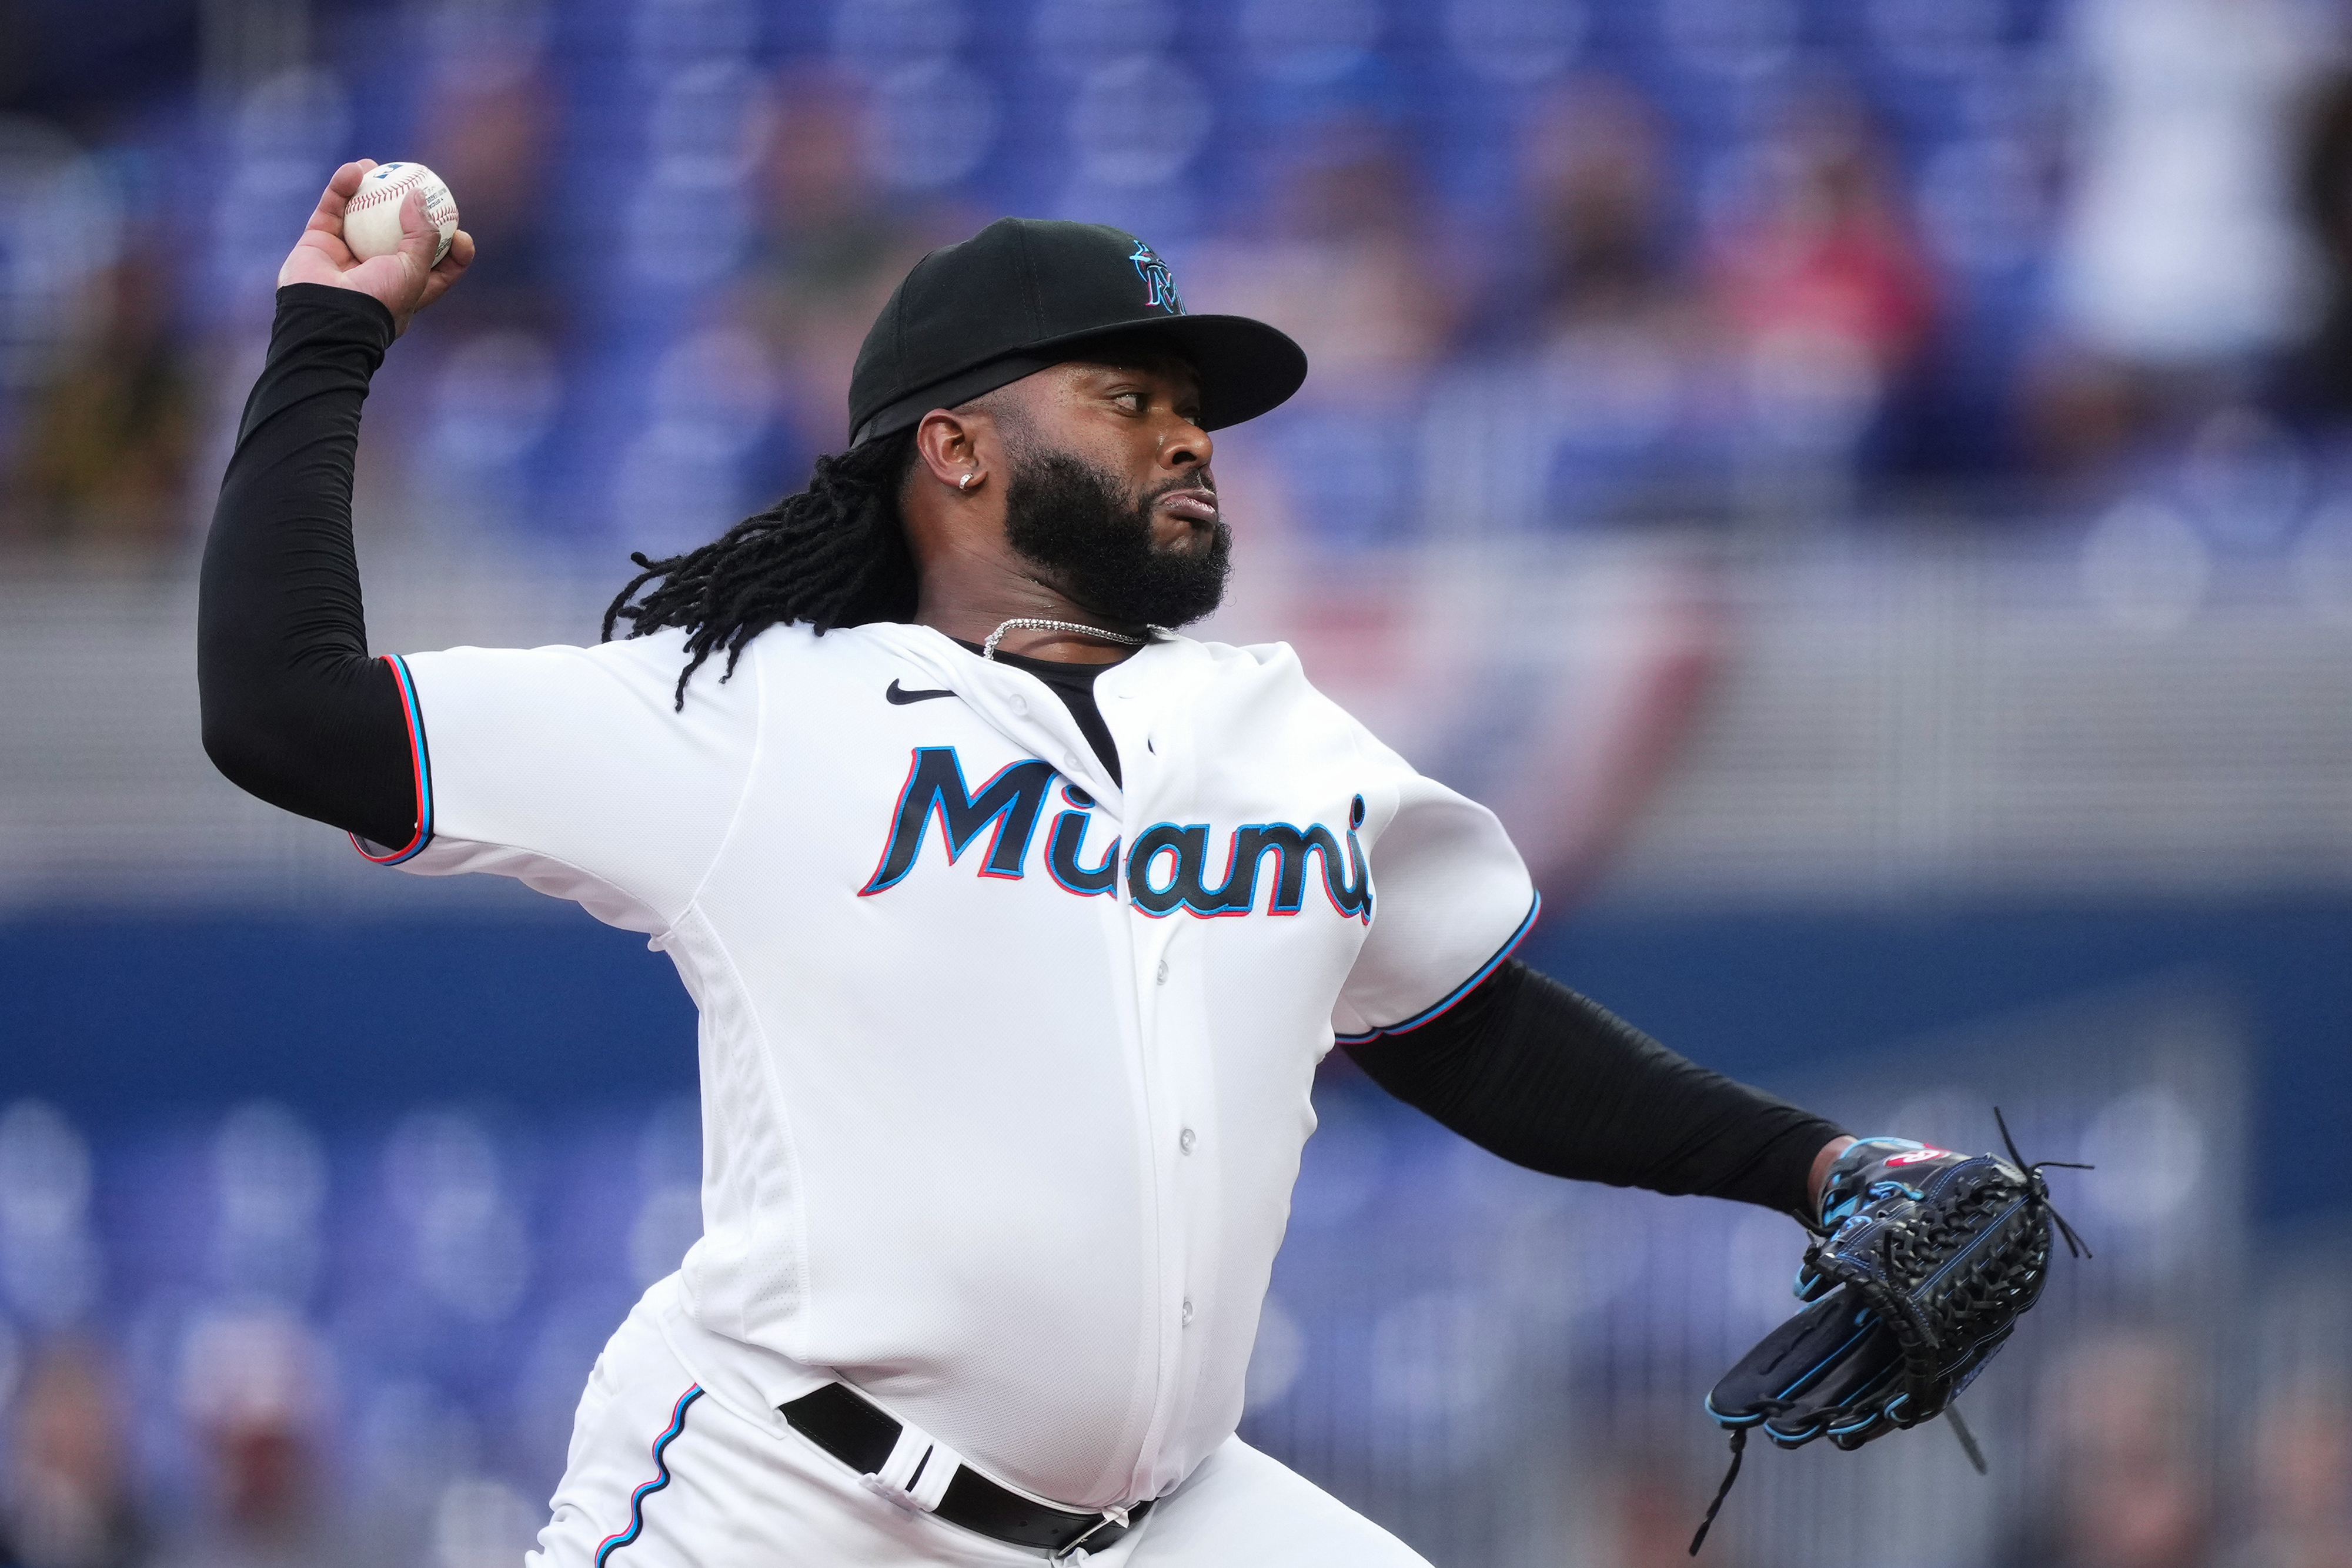 Johnny Cueto of the Miami Marlins delivers a pitch in the game against the Minnesota Twins at loanDepot park on April 3, 2023 in Miami, Florida.